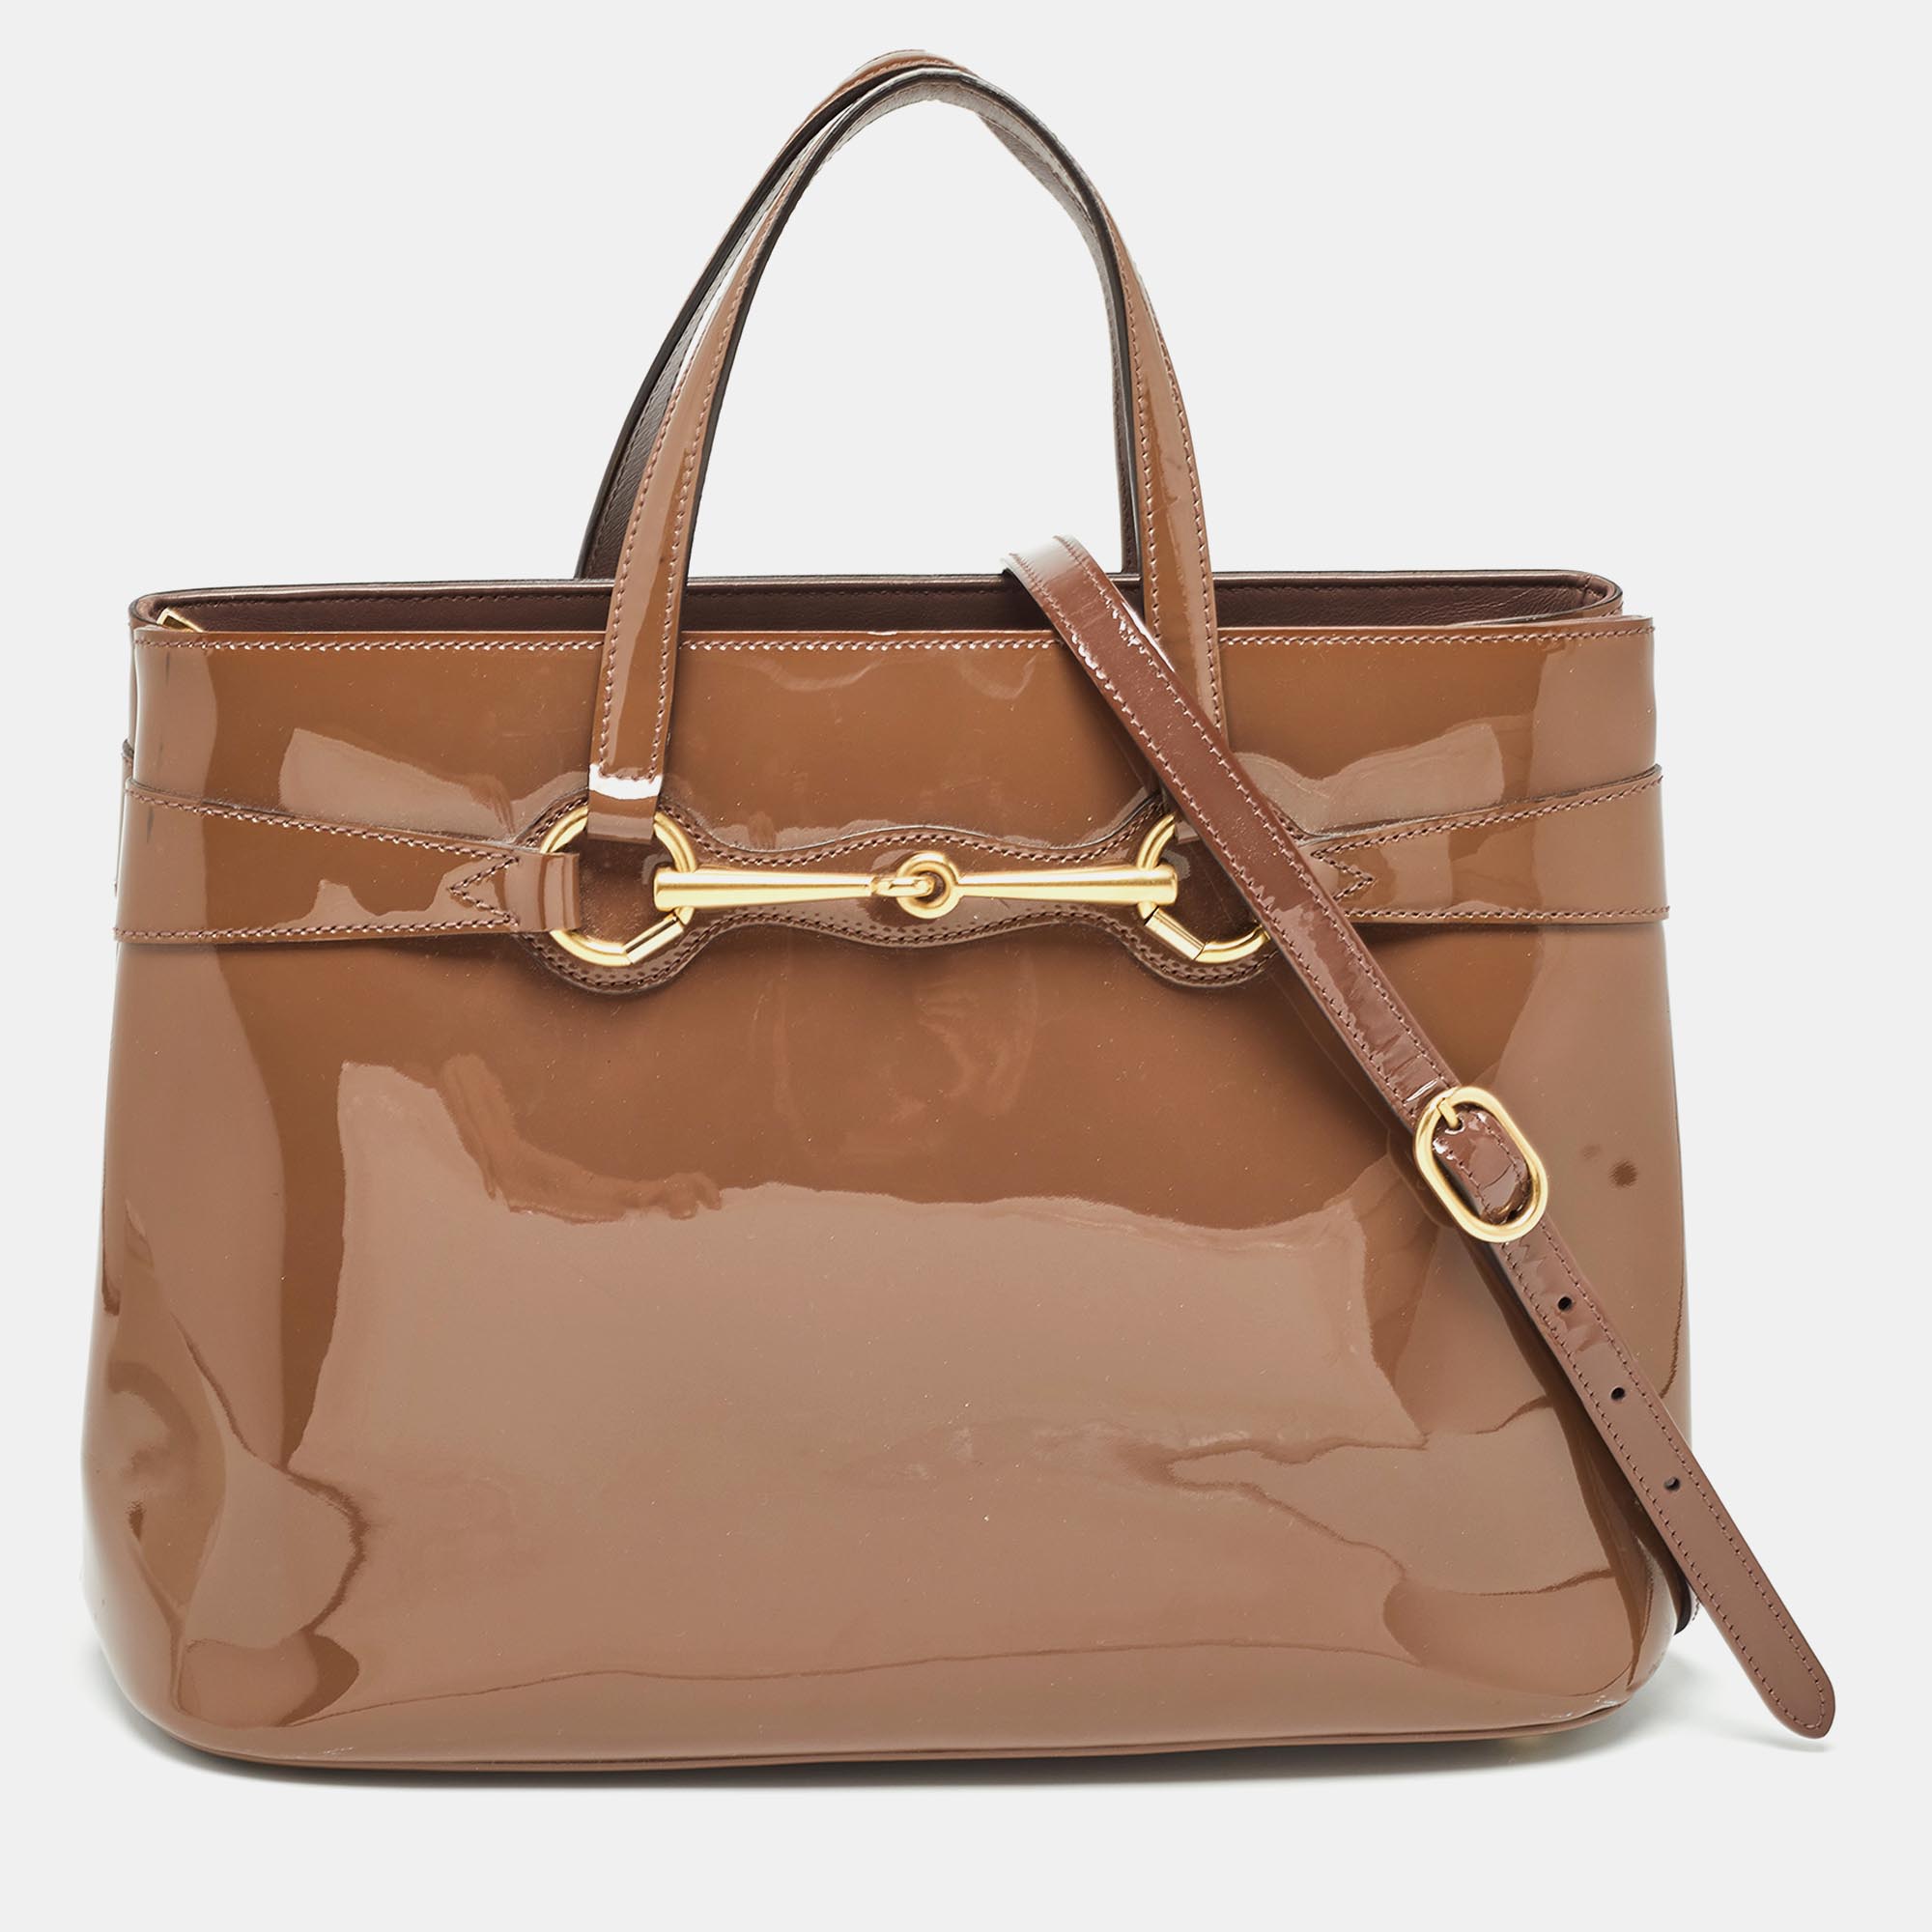 Complete an elegant look with this beautiful Gucci Horsebit tote. It is crafted from patent leather and has the iconic Horsebit accent in gold tone on the front. The brown bag opens to a canvas lined interior that will easily hold all your essentials. This bag can be paraded using the double top handles as well as the optional shoulder strap.